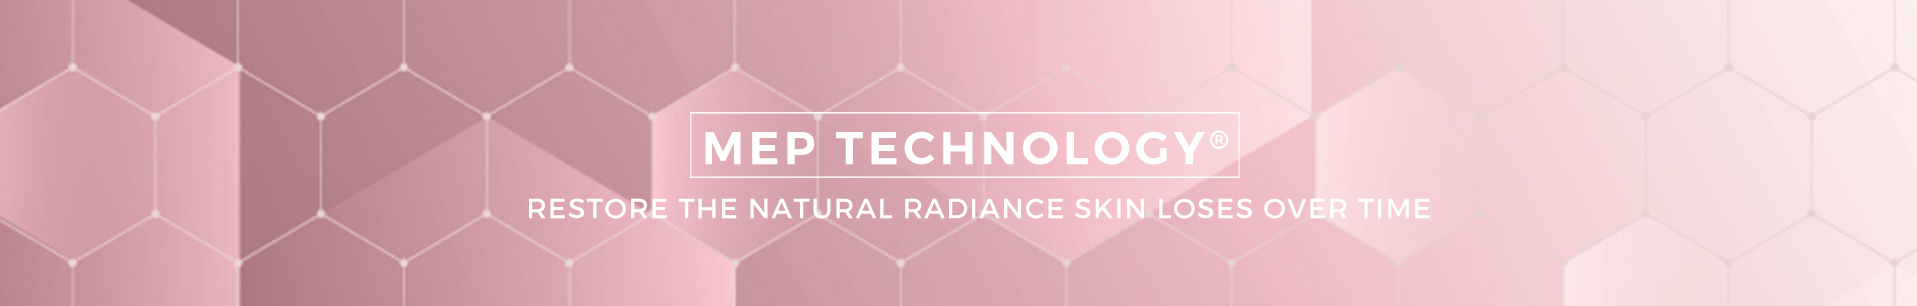 MEP Technology. Restore the natural radiance skin loses over time